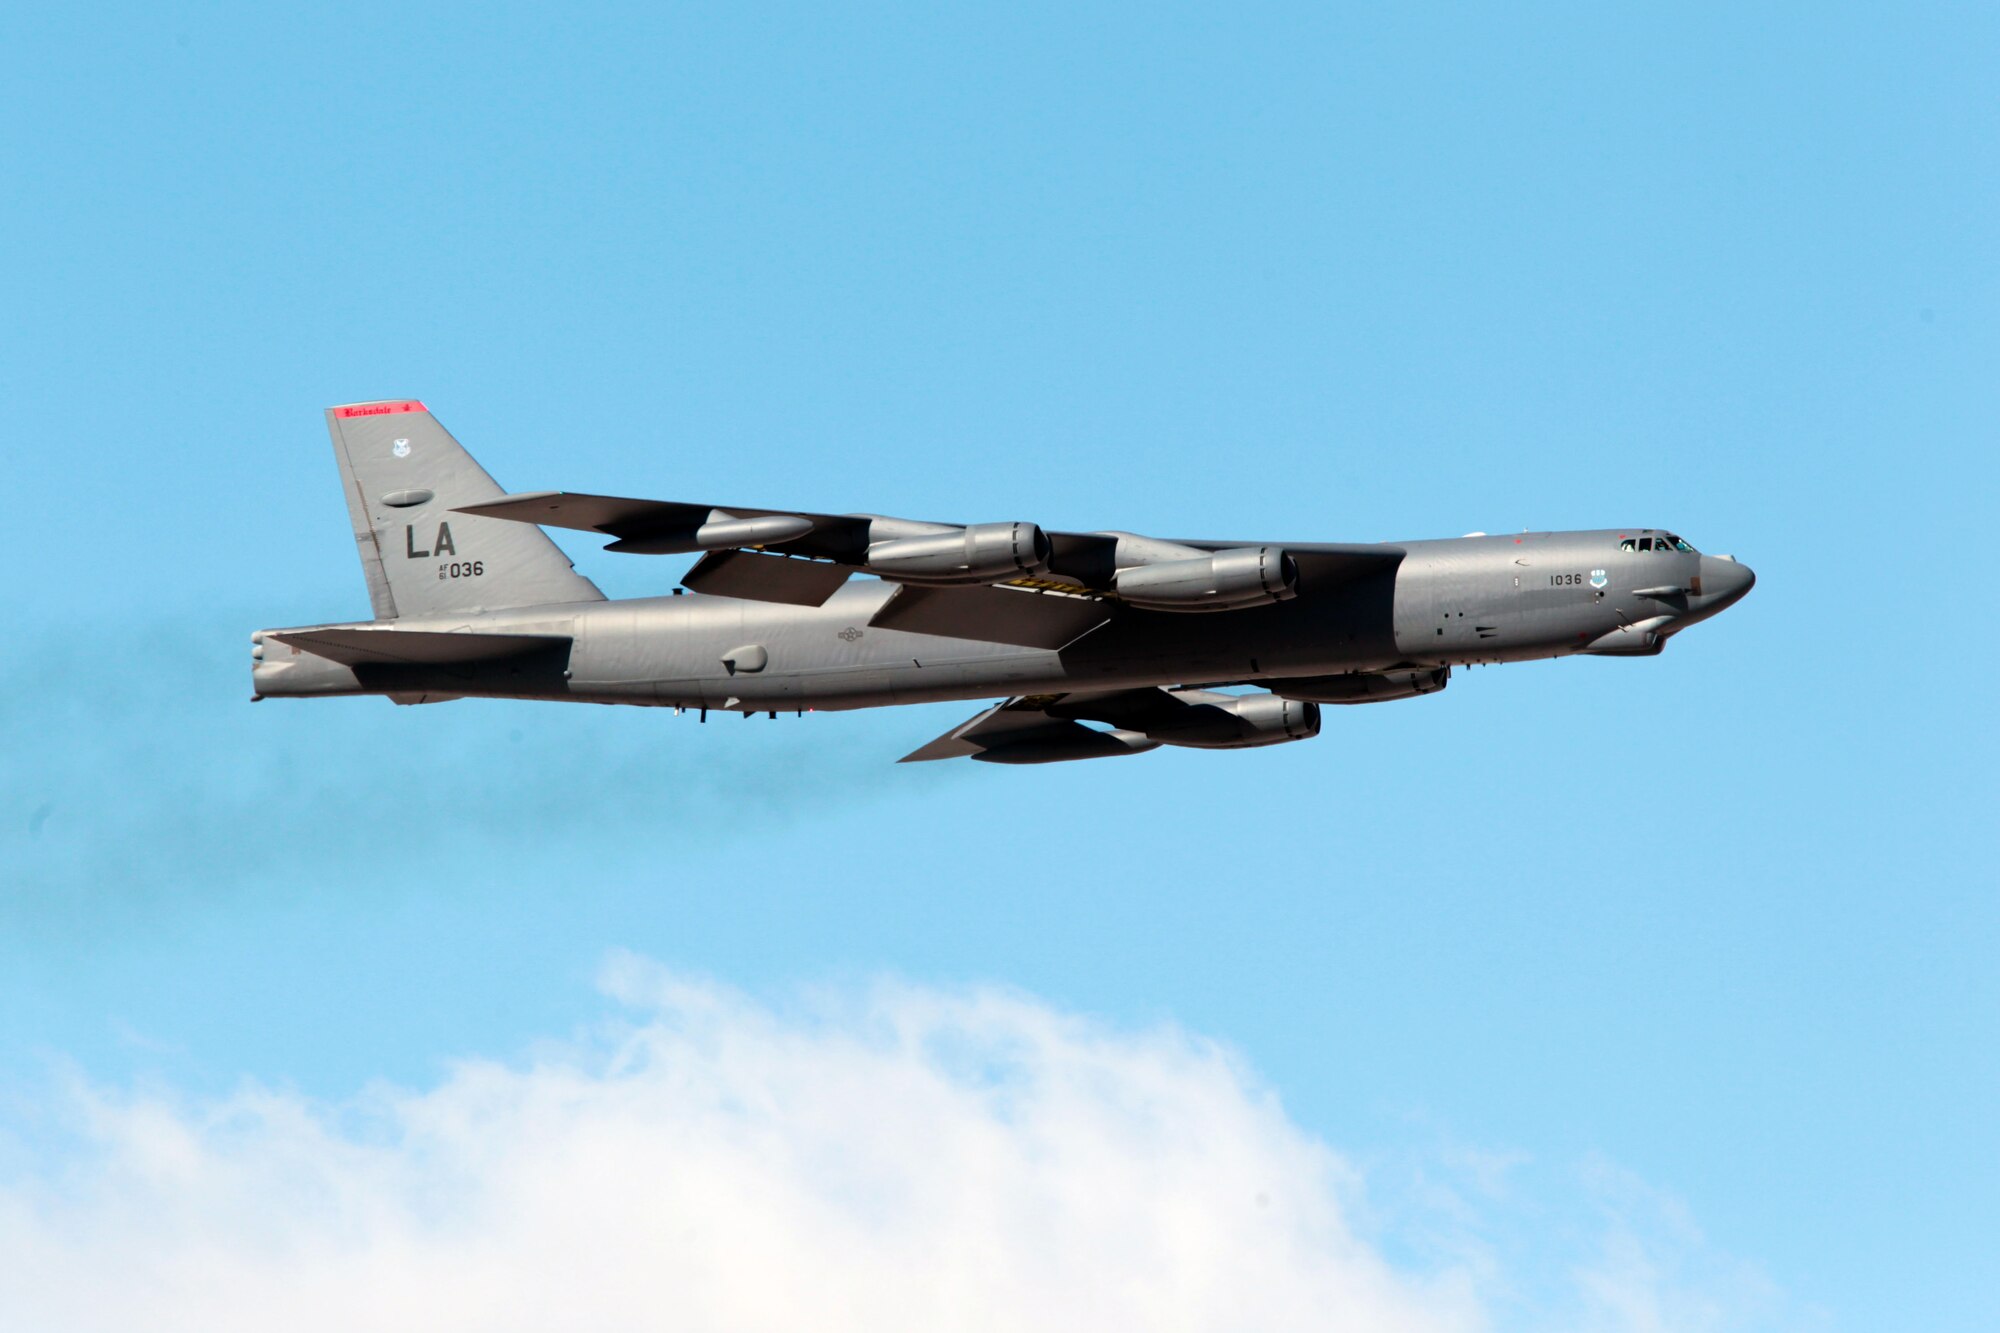 A B-52H Stratofortress from the 96th Bomb Squadron, Barksdale Air Force Base, La., flies a sortie Feb. 1 during Exercise Red Flag at Nellis AFB, Nev. The purpose of Exercise Red Flag is to train pilots from the U.S., NATO and other allied countries for realistic combat scenarios. This includes the use of live ammunition for bombing exercises within the Nevada Test and Training Range.  (U.S. Air Force photo by Kevin Cox)